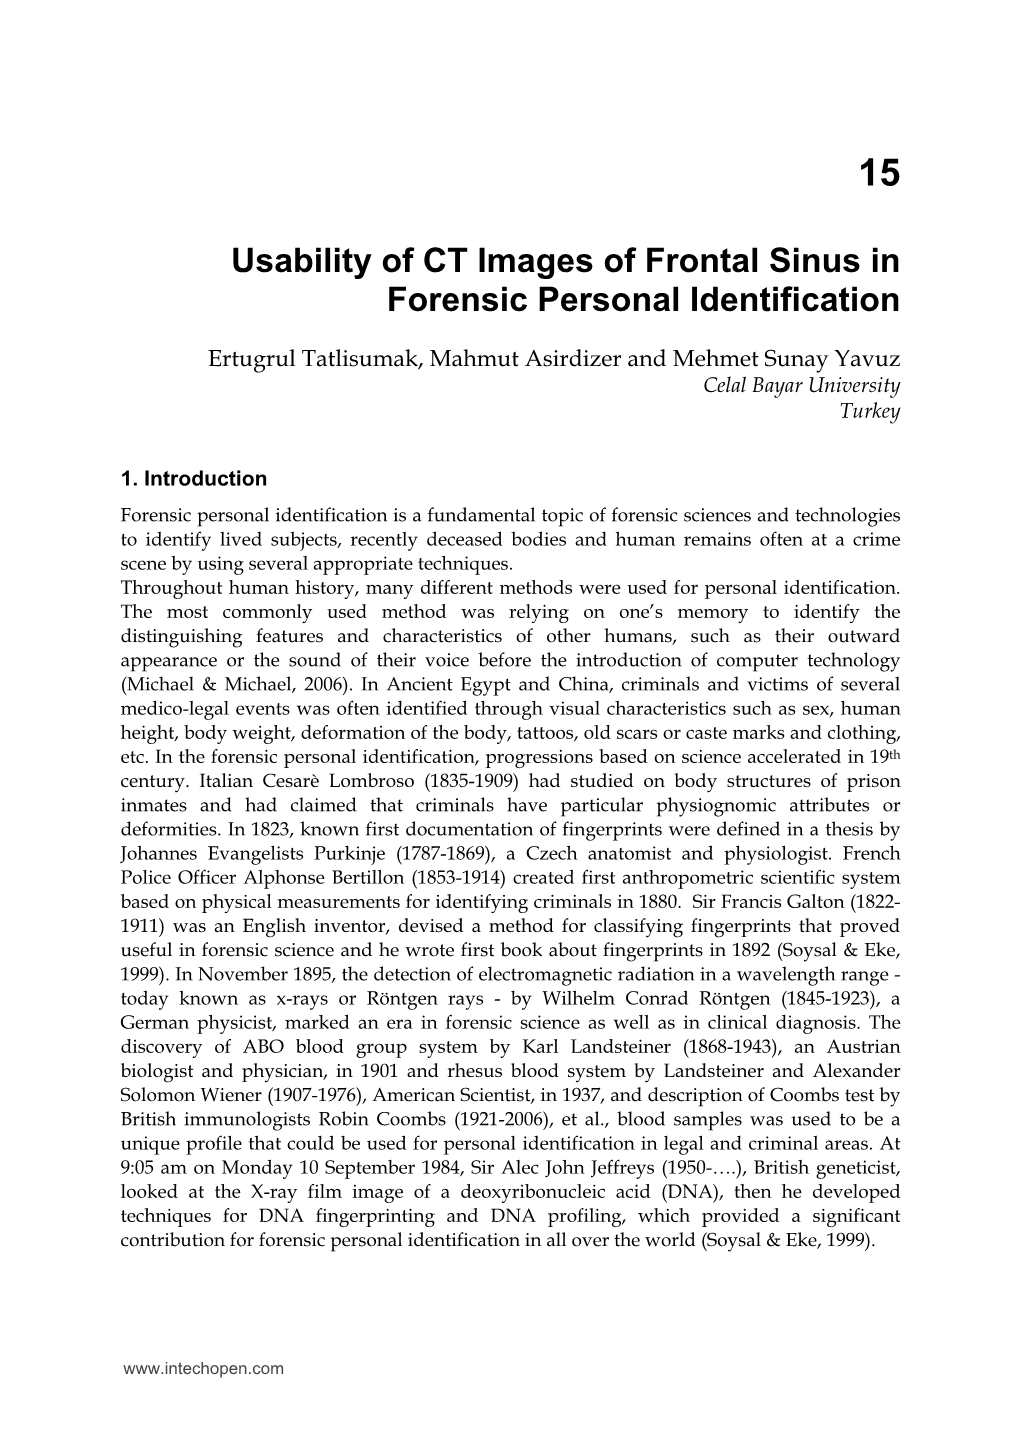 Usability of CT Images of Frontal Sinus in Forensic Personal Identification